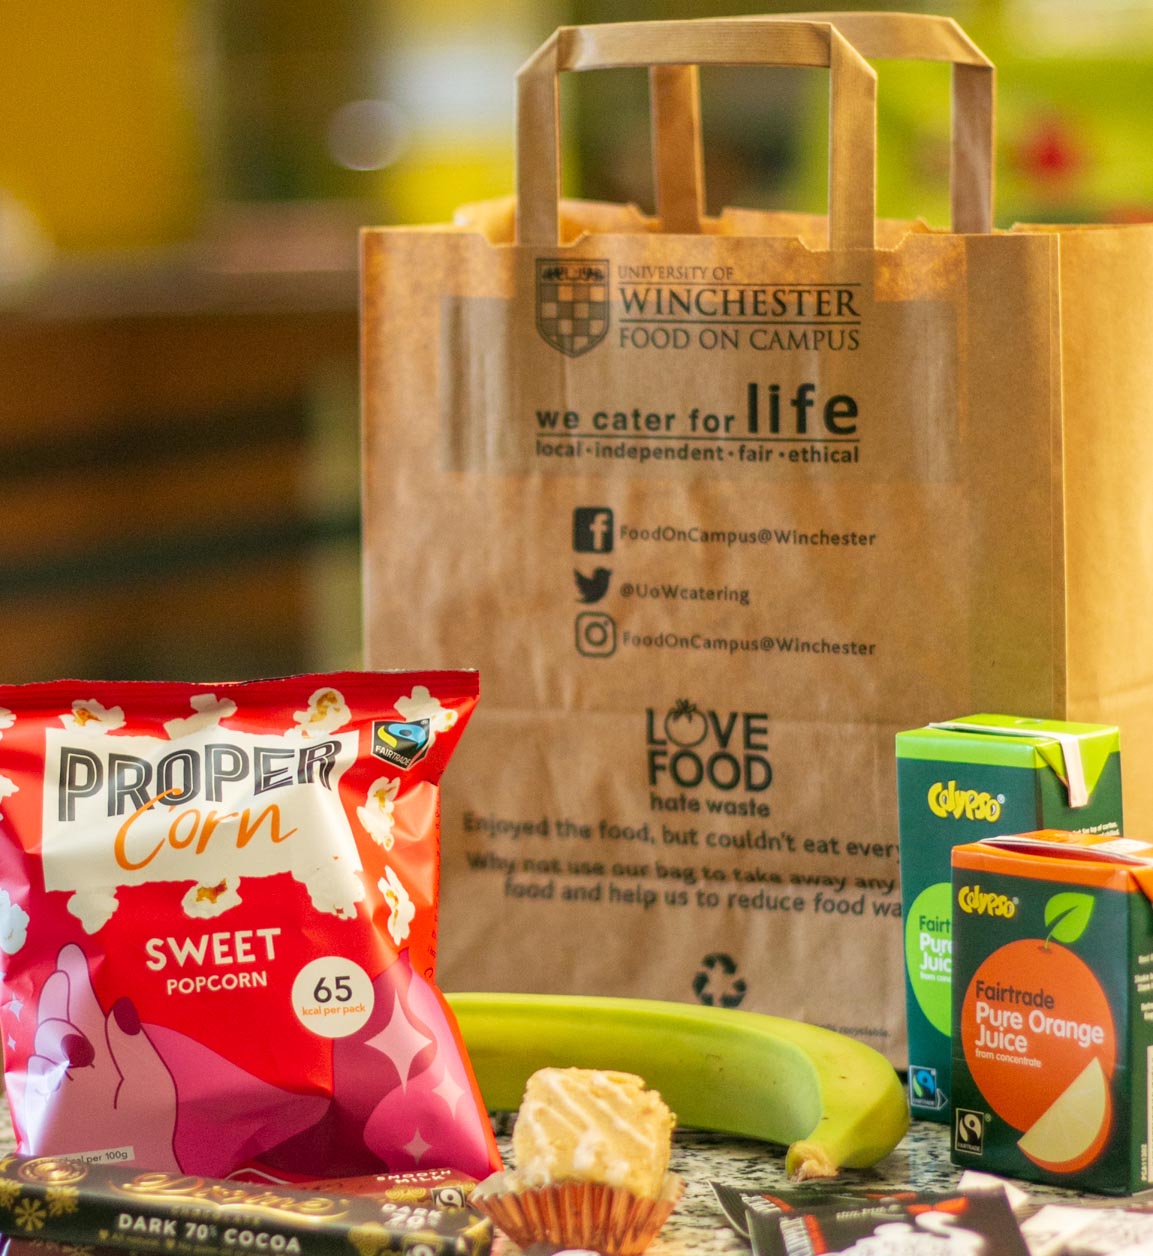 Group of fairtrade food items including a banana, bag of popcorn and drink cartons